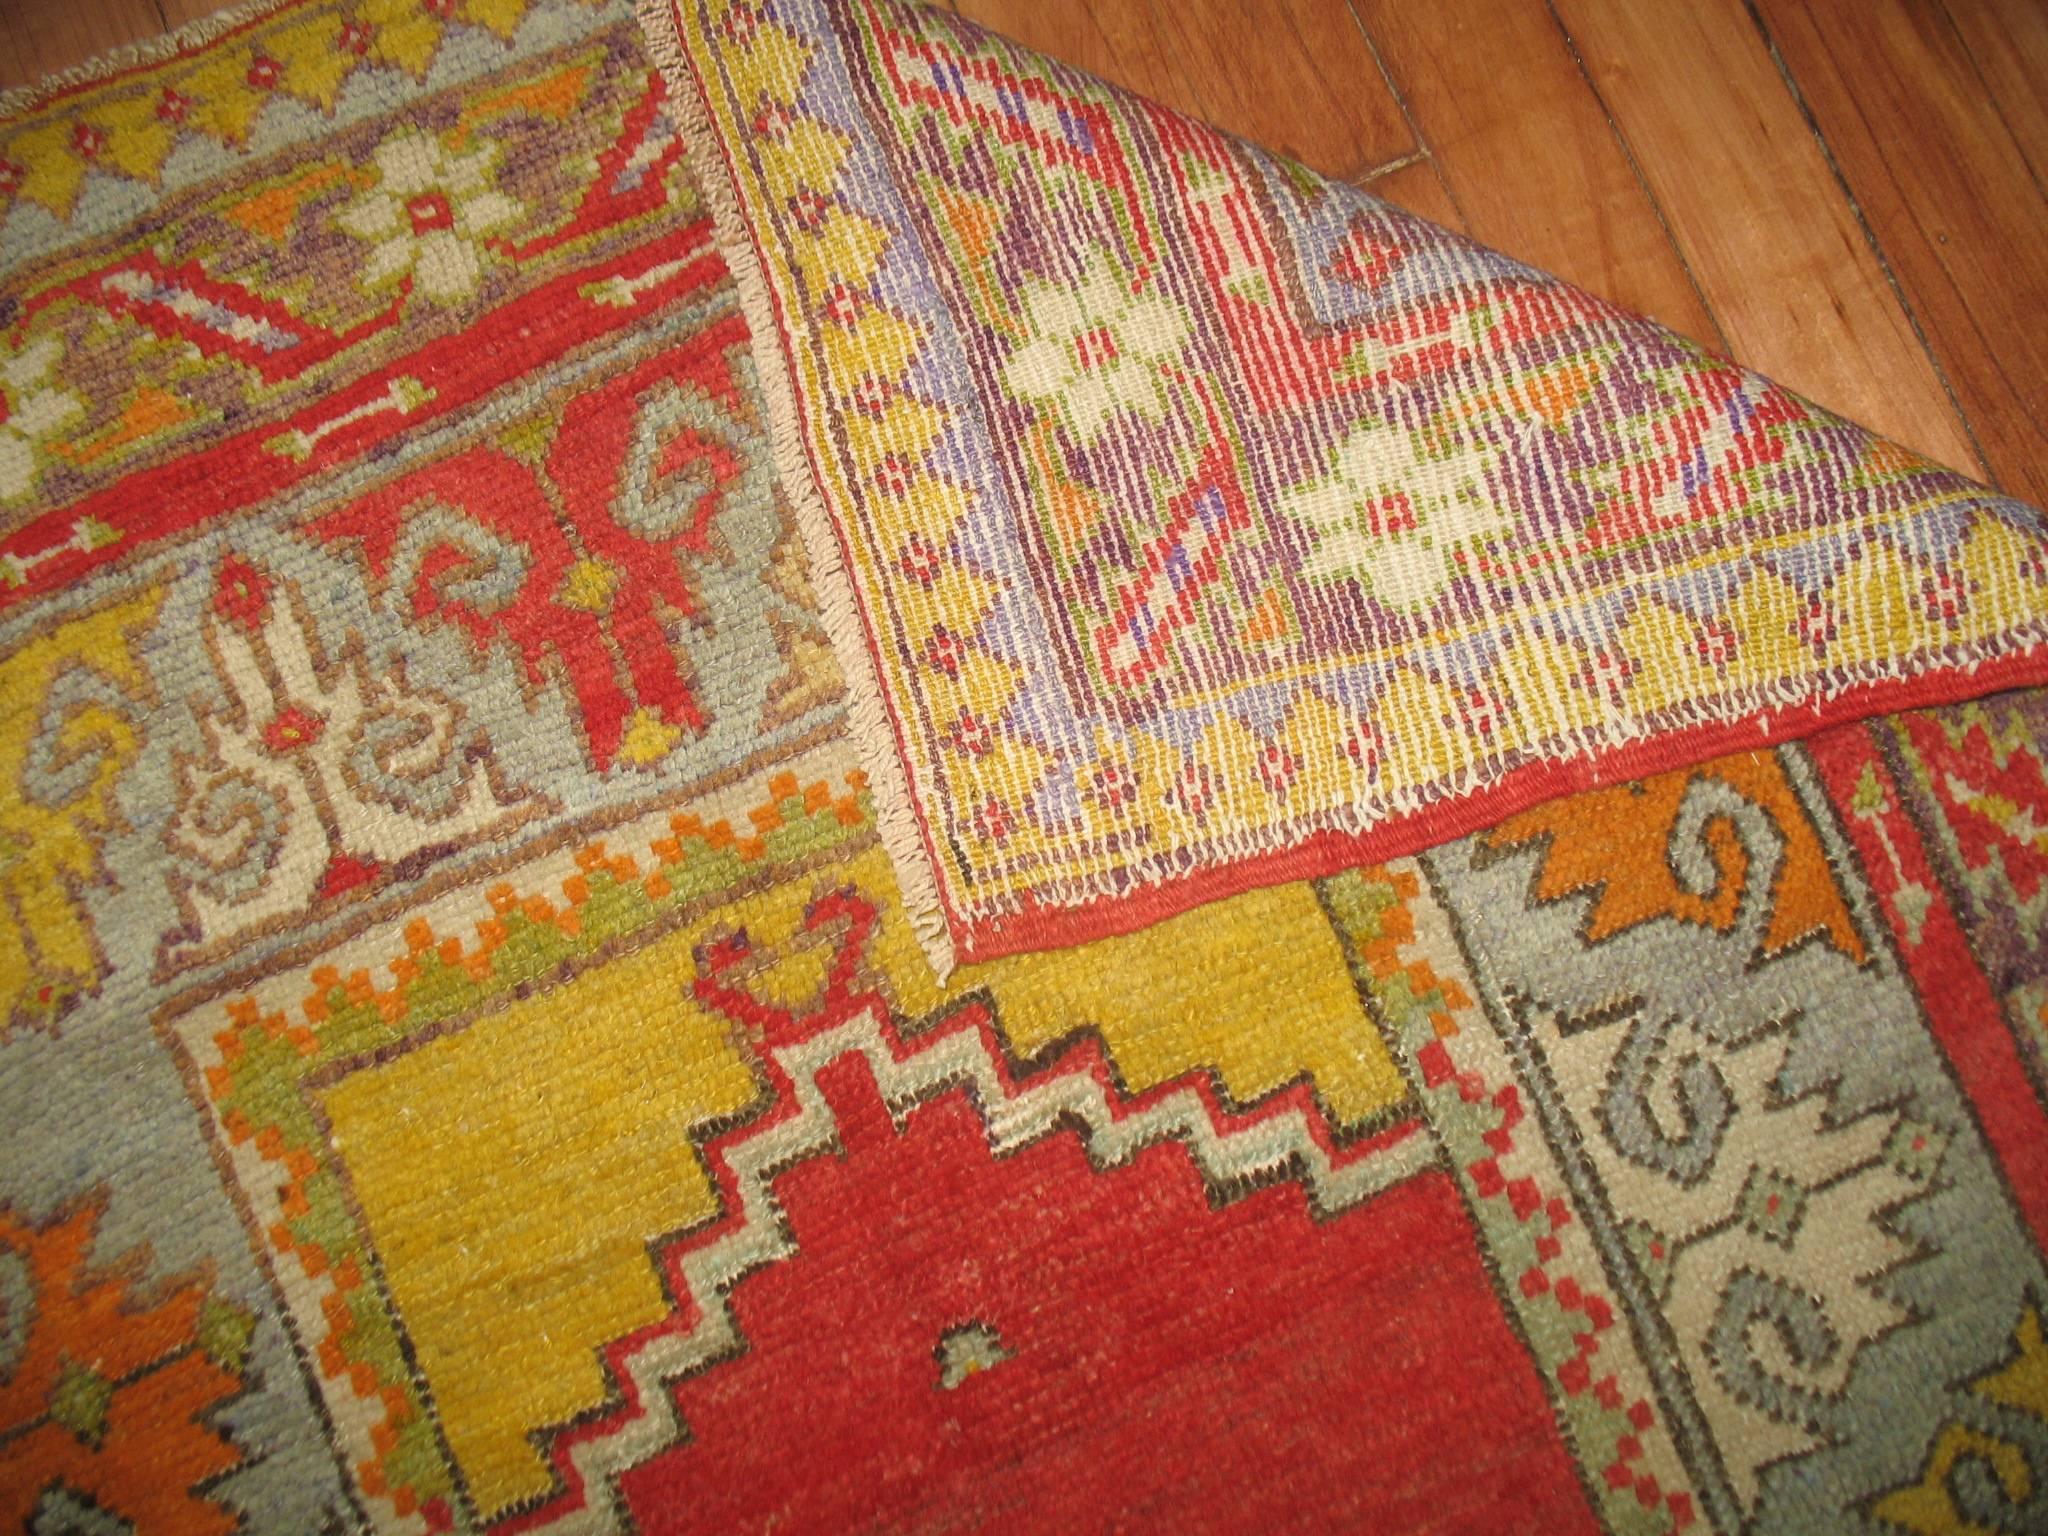 A colorful 20th century Turkish Melas scatter size rug.

Measures: 3' x 4'7''.